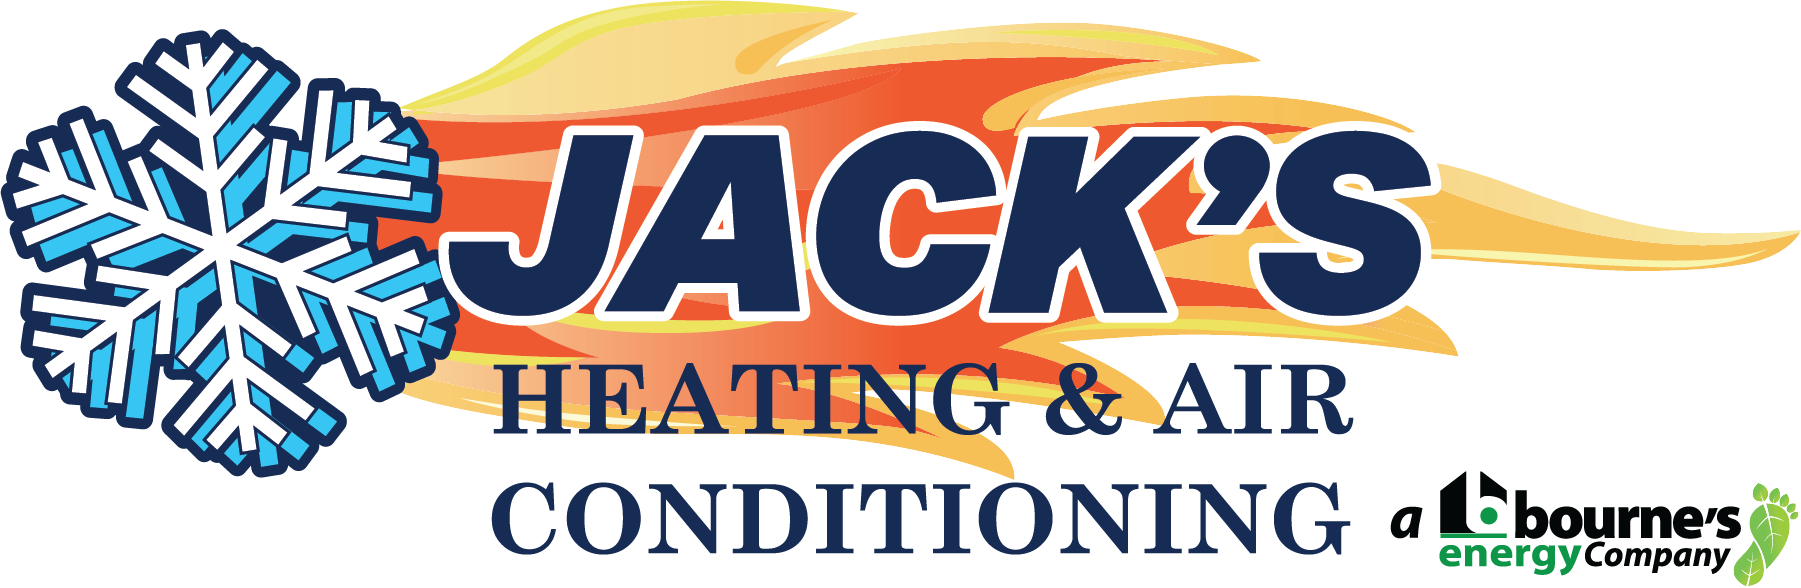 Jack's Heating & Air Conditioning